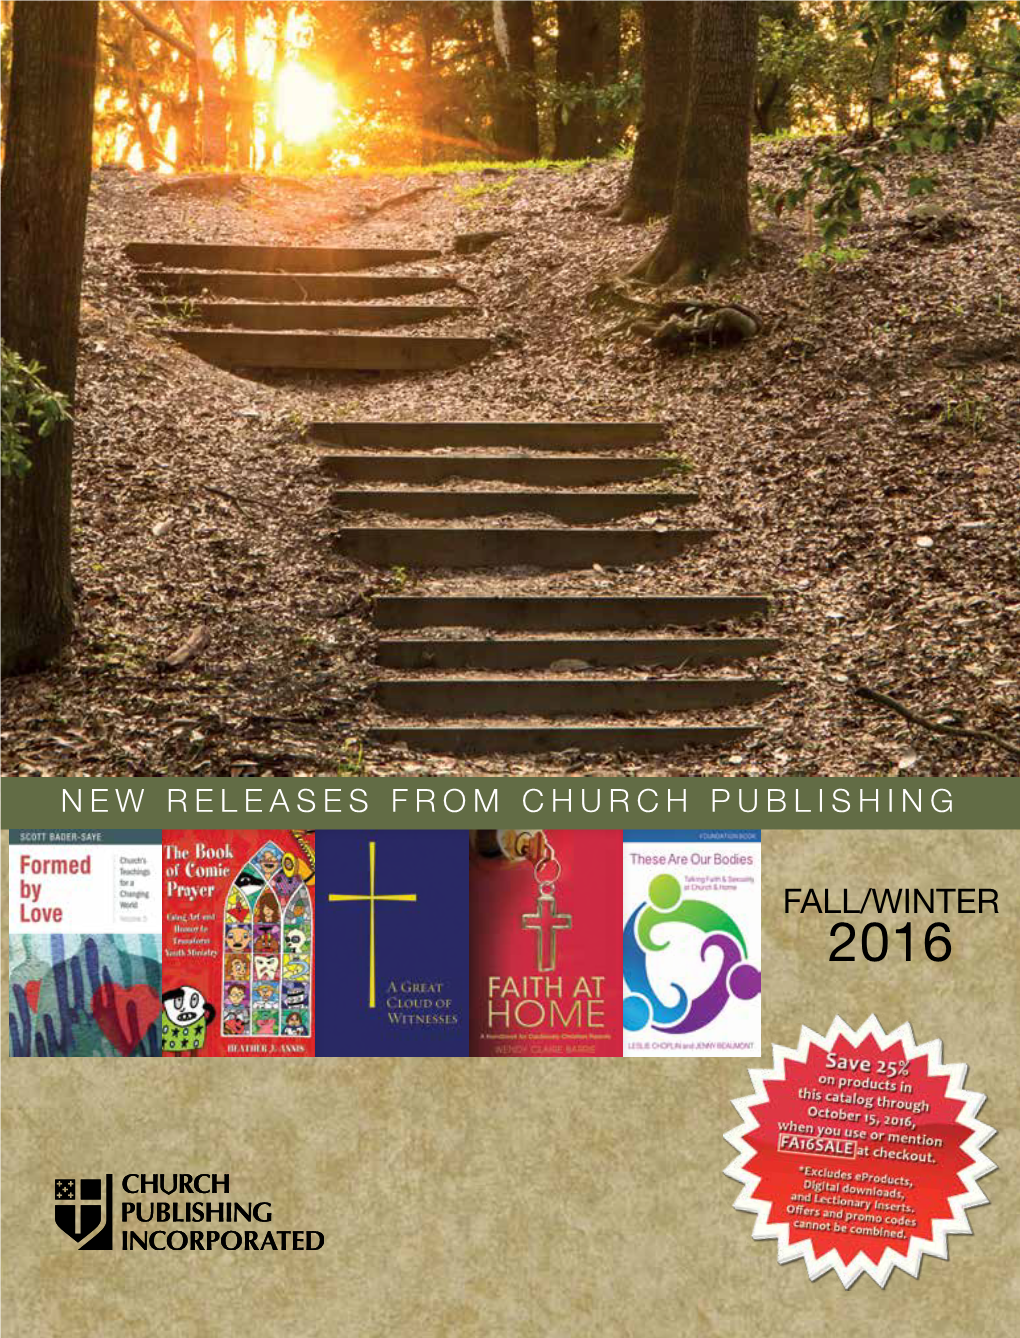 FALL/WINTER 2016 to the Many Valued Customers of Church Publishing Incorporated!